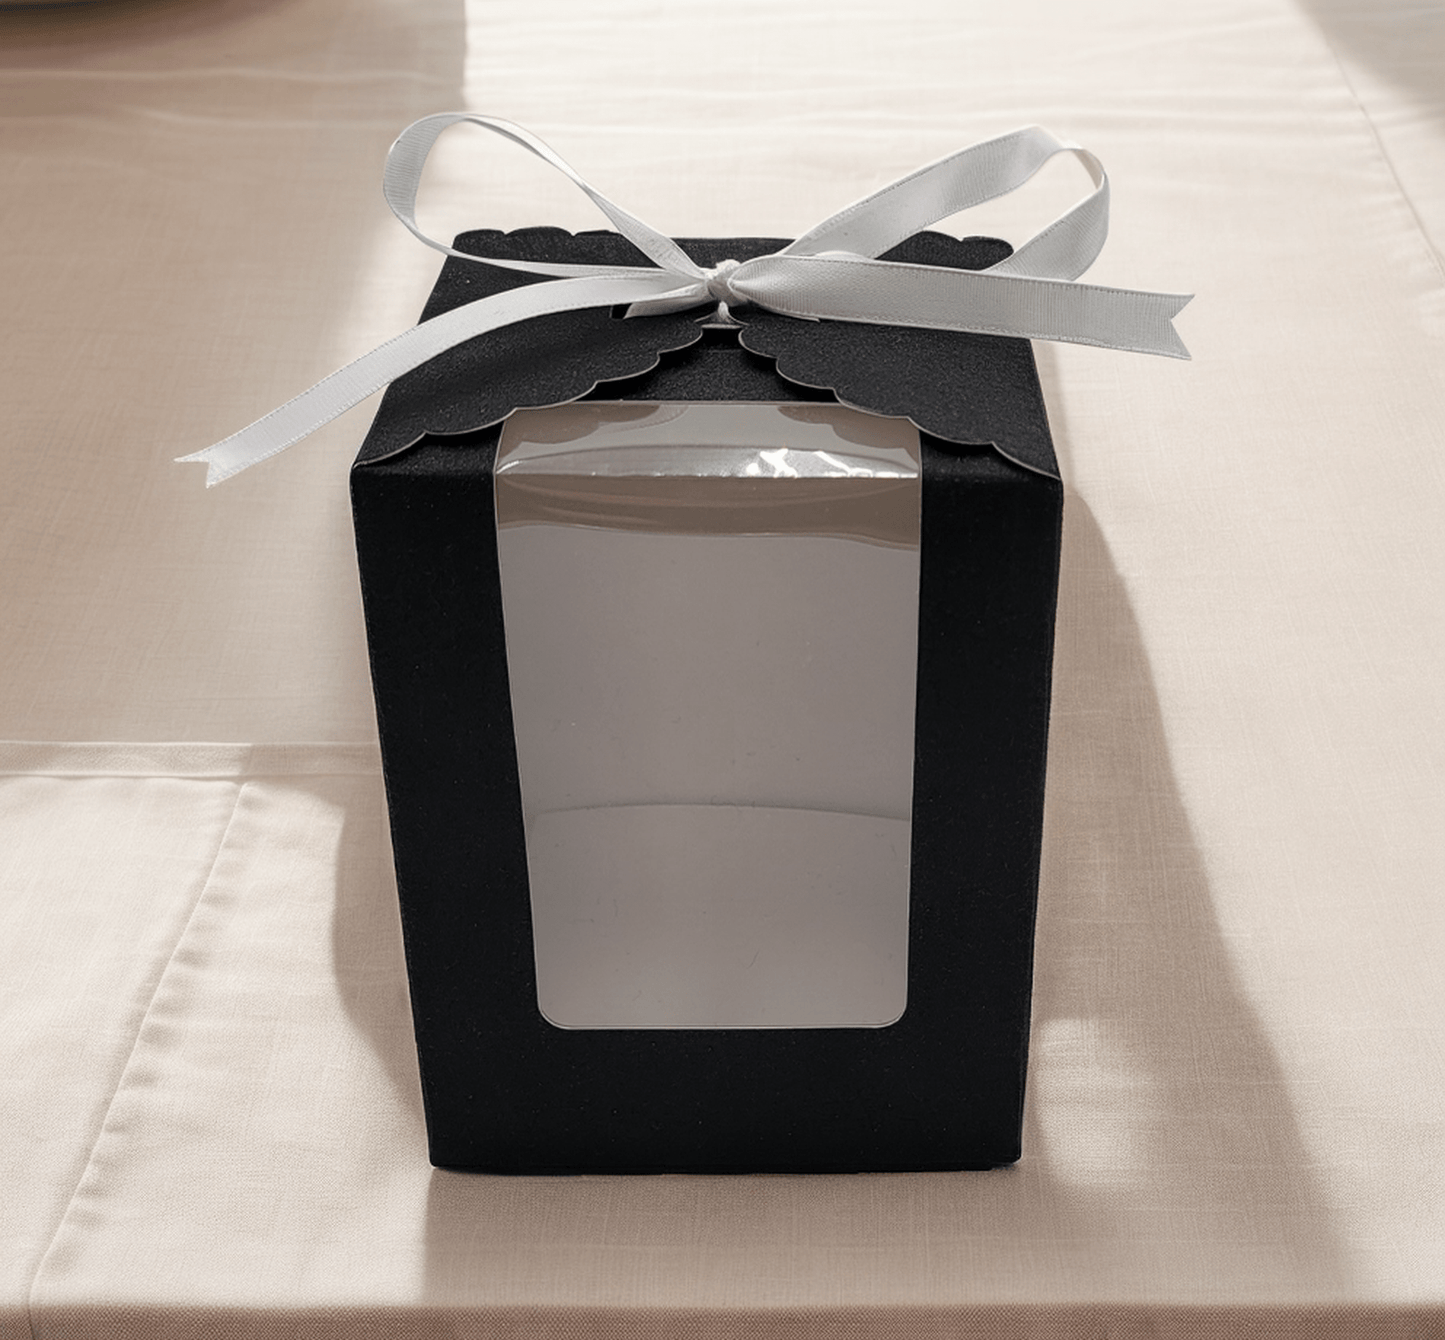 Black Sparkling Wedding Favor Box - 40 Count, Large 4"x4"x5" with Clear Display Window. Includes 2 Ribbon Colors (White and Black). Elegant Stemless Wine Glass Gift Box - Holds 15 oz Glass. Extra Bottom Insert for Durability. Ideal for Weddings & Events - T and C Party Supply T and C Party Supply